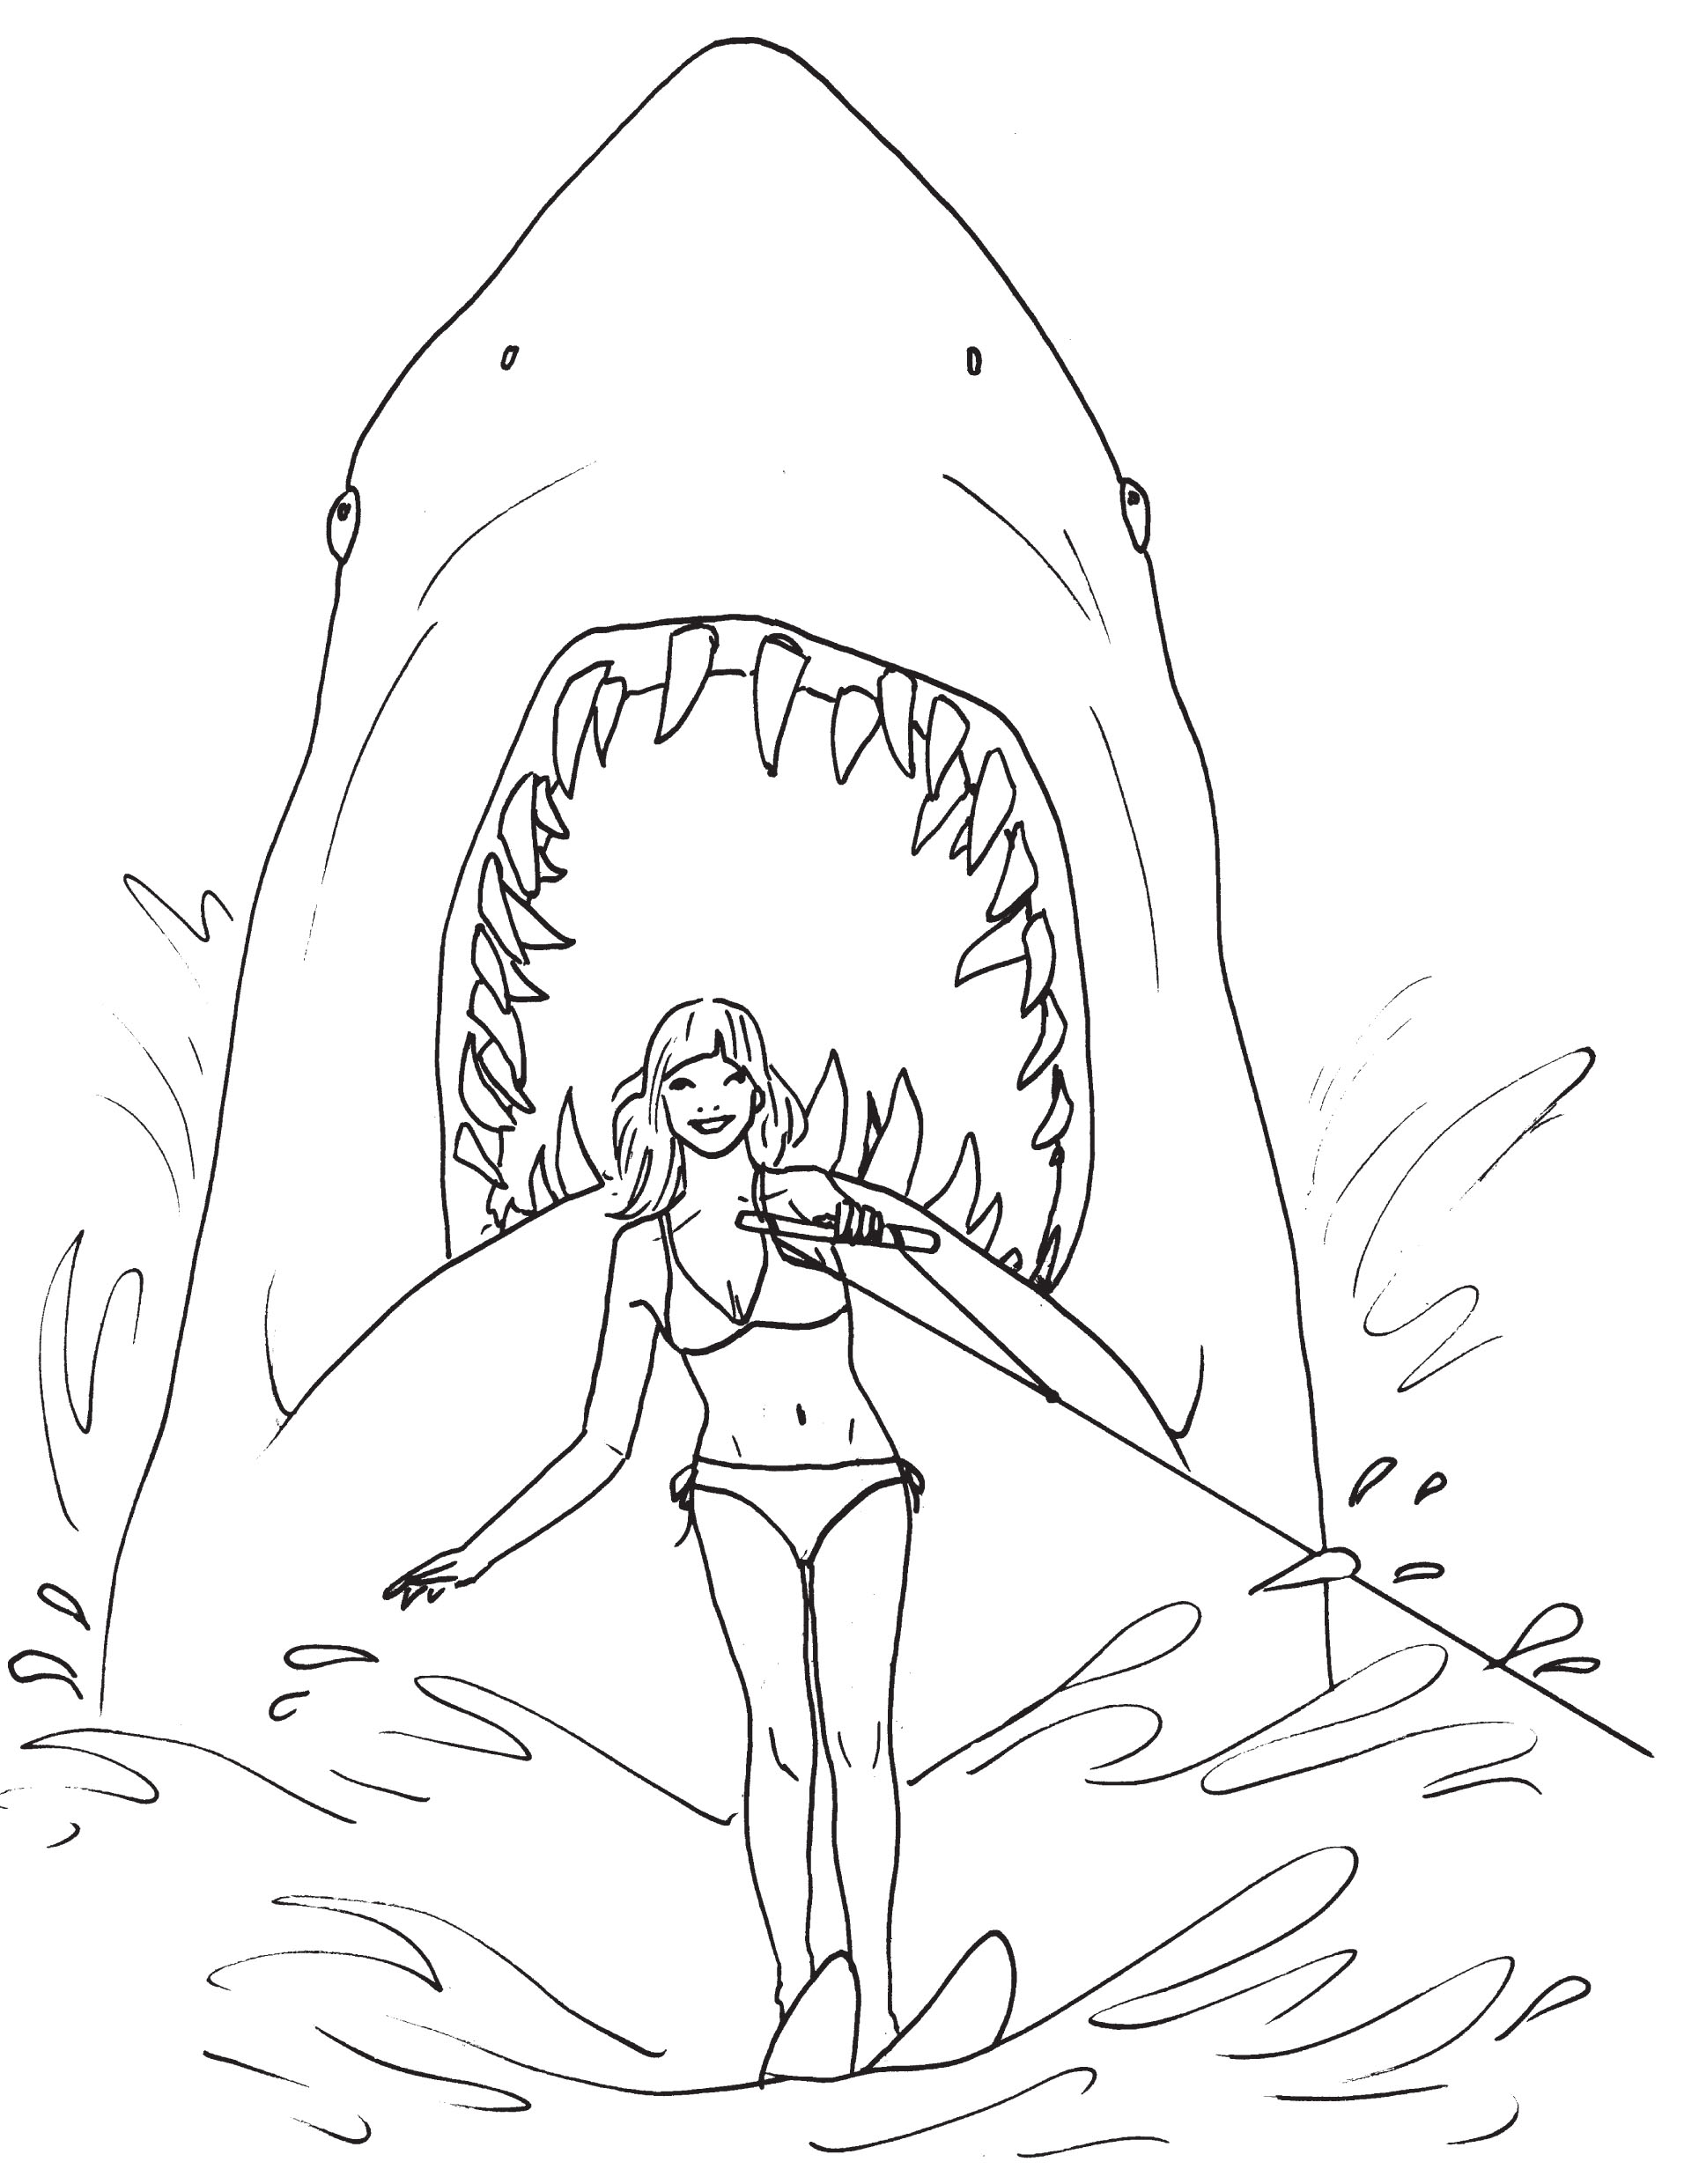 Great white shark coloring pages to download and print for ...